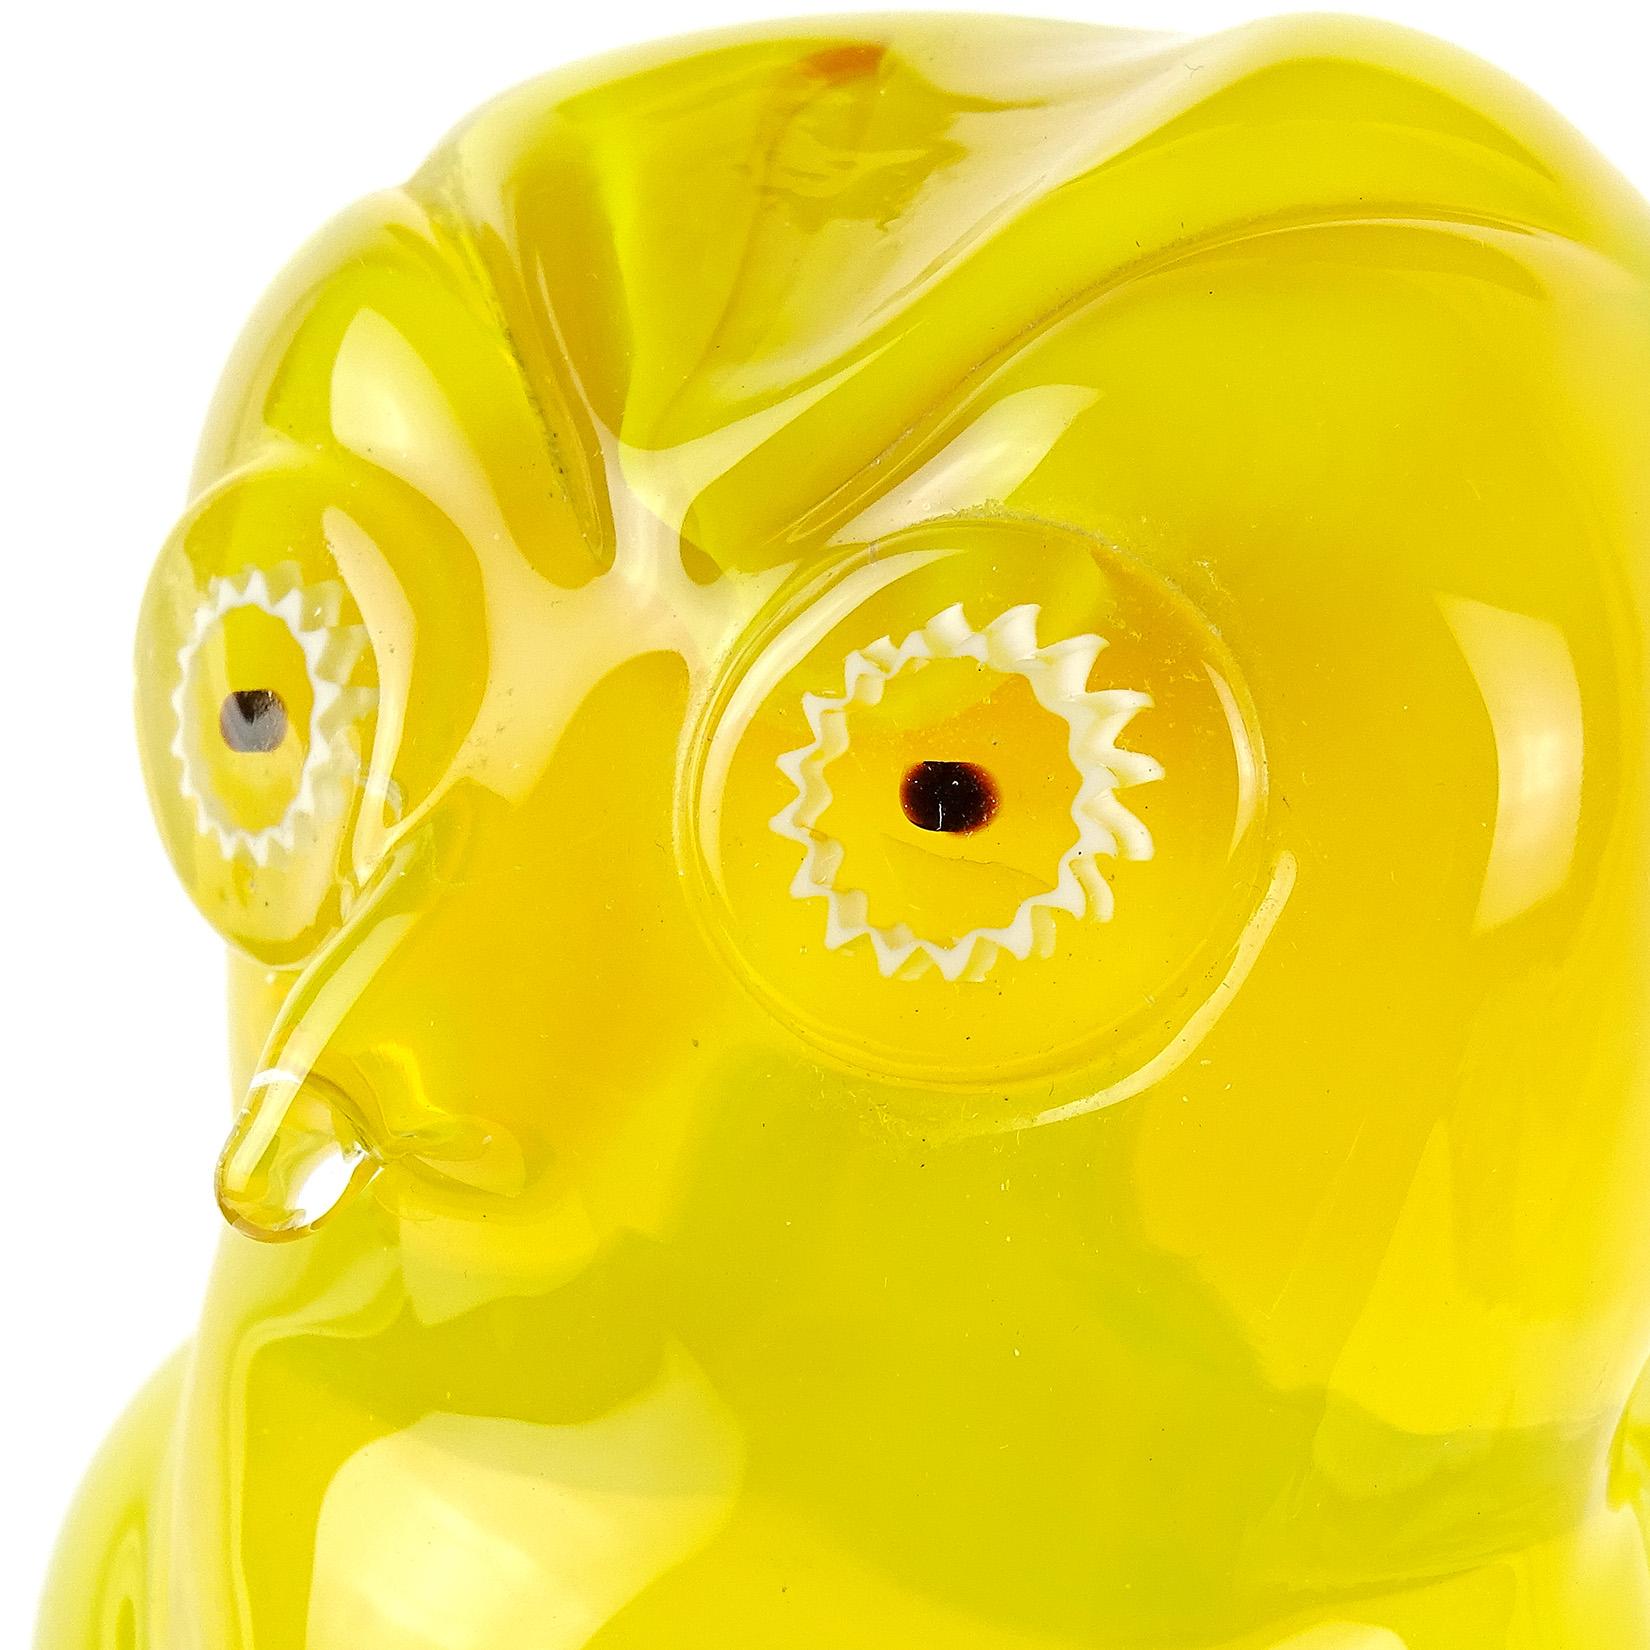 Beautiful Murano handblown Sommerso sunny yellow Italian art glass owl sculpture. Documented to the Salviati Company. It has white murrines for the eyes and stands on clear glass pedestal. Original Salviati gallery label underneath. Measures: 8 1/4”